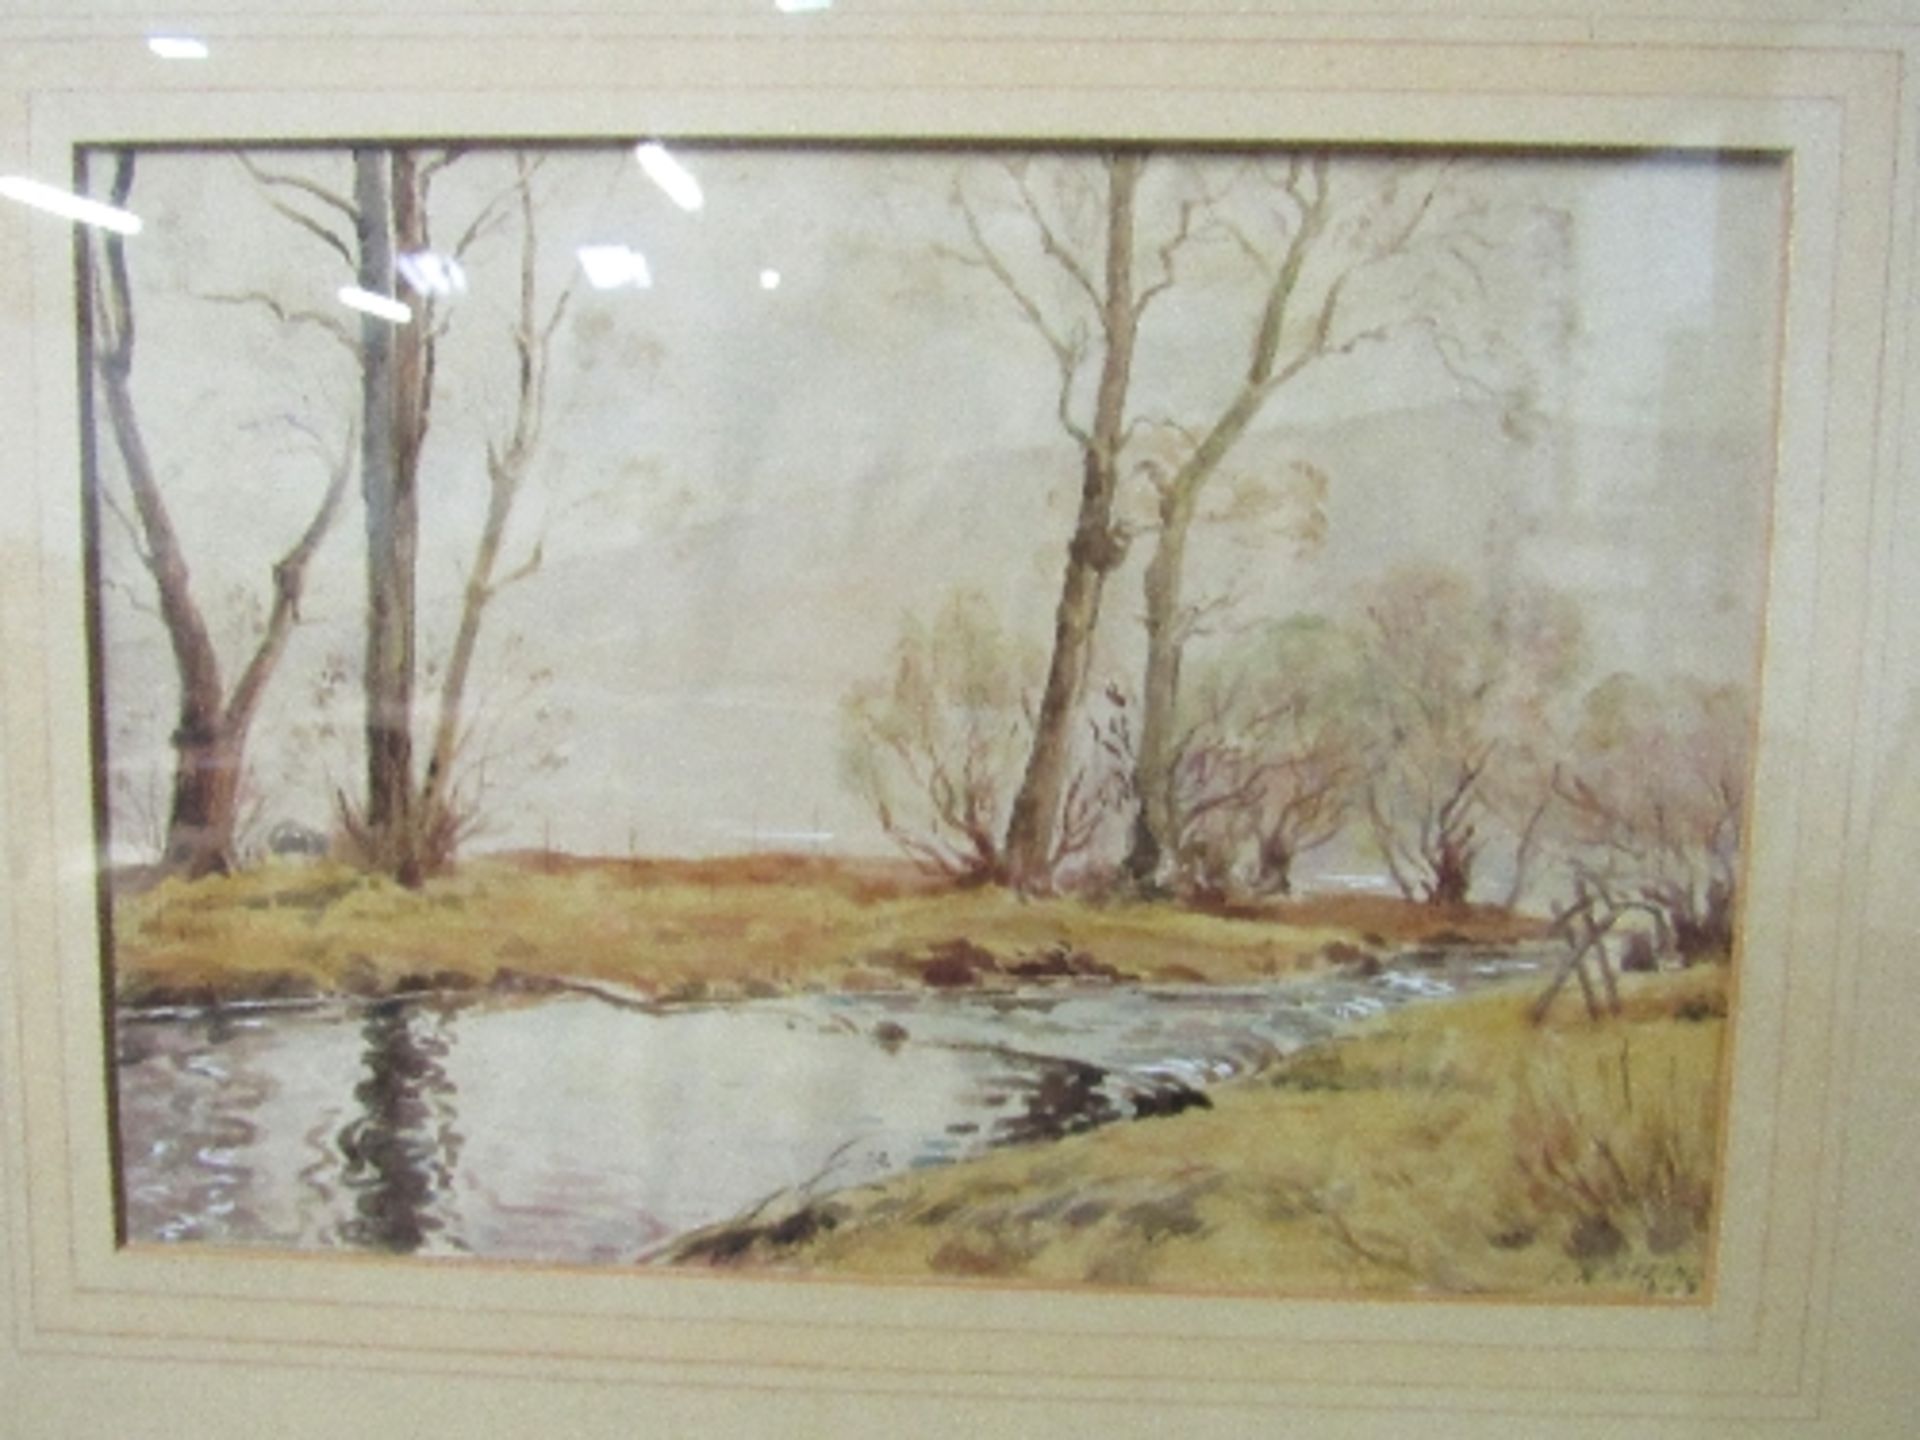 Framed & glazed watercolour of a river scene signed R A Atkins 1847. Estimate £10-20.